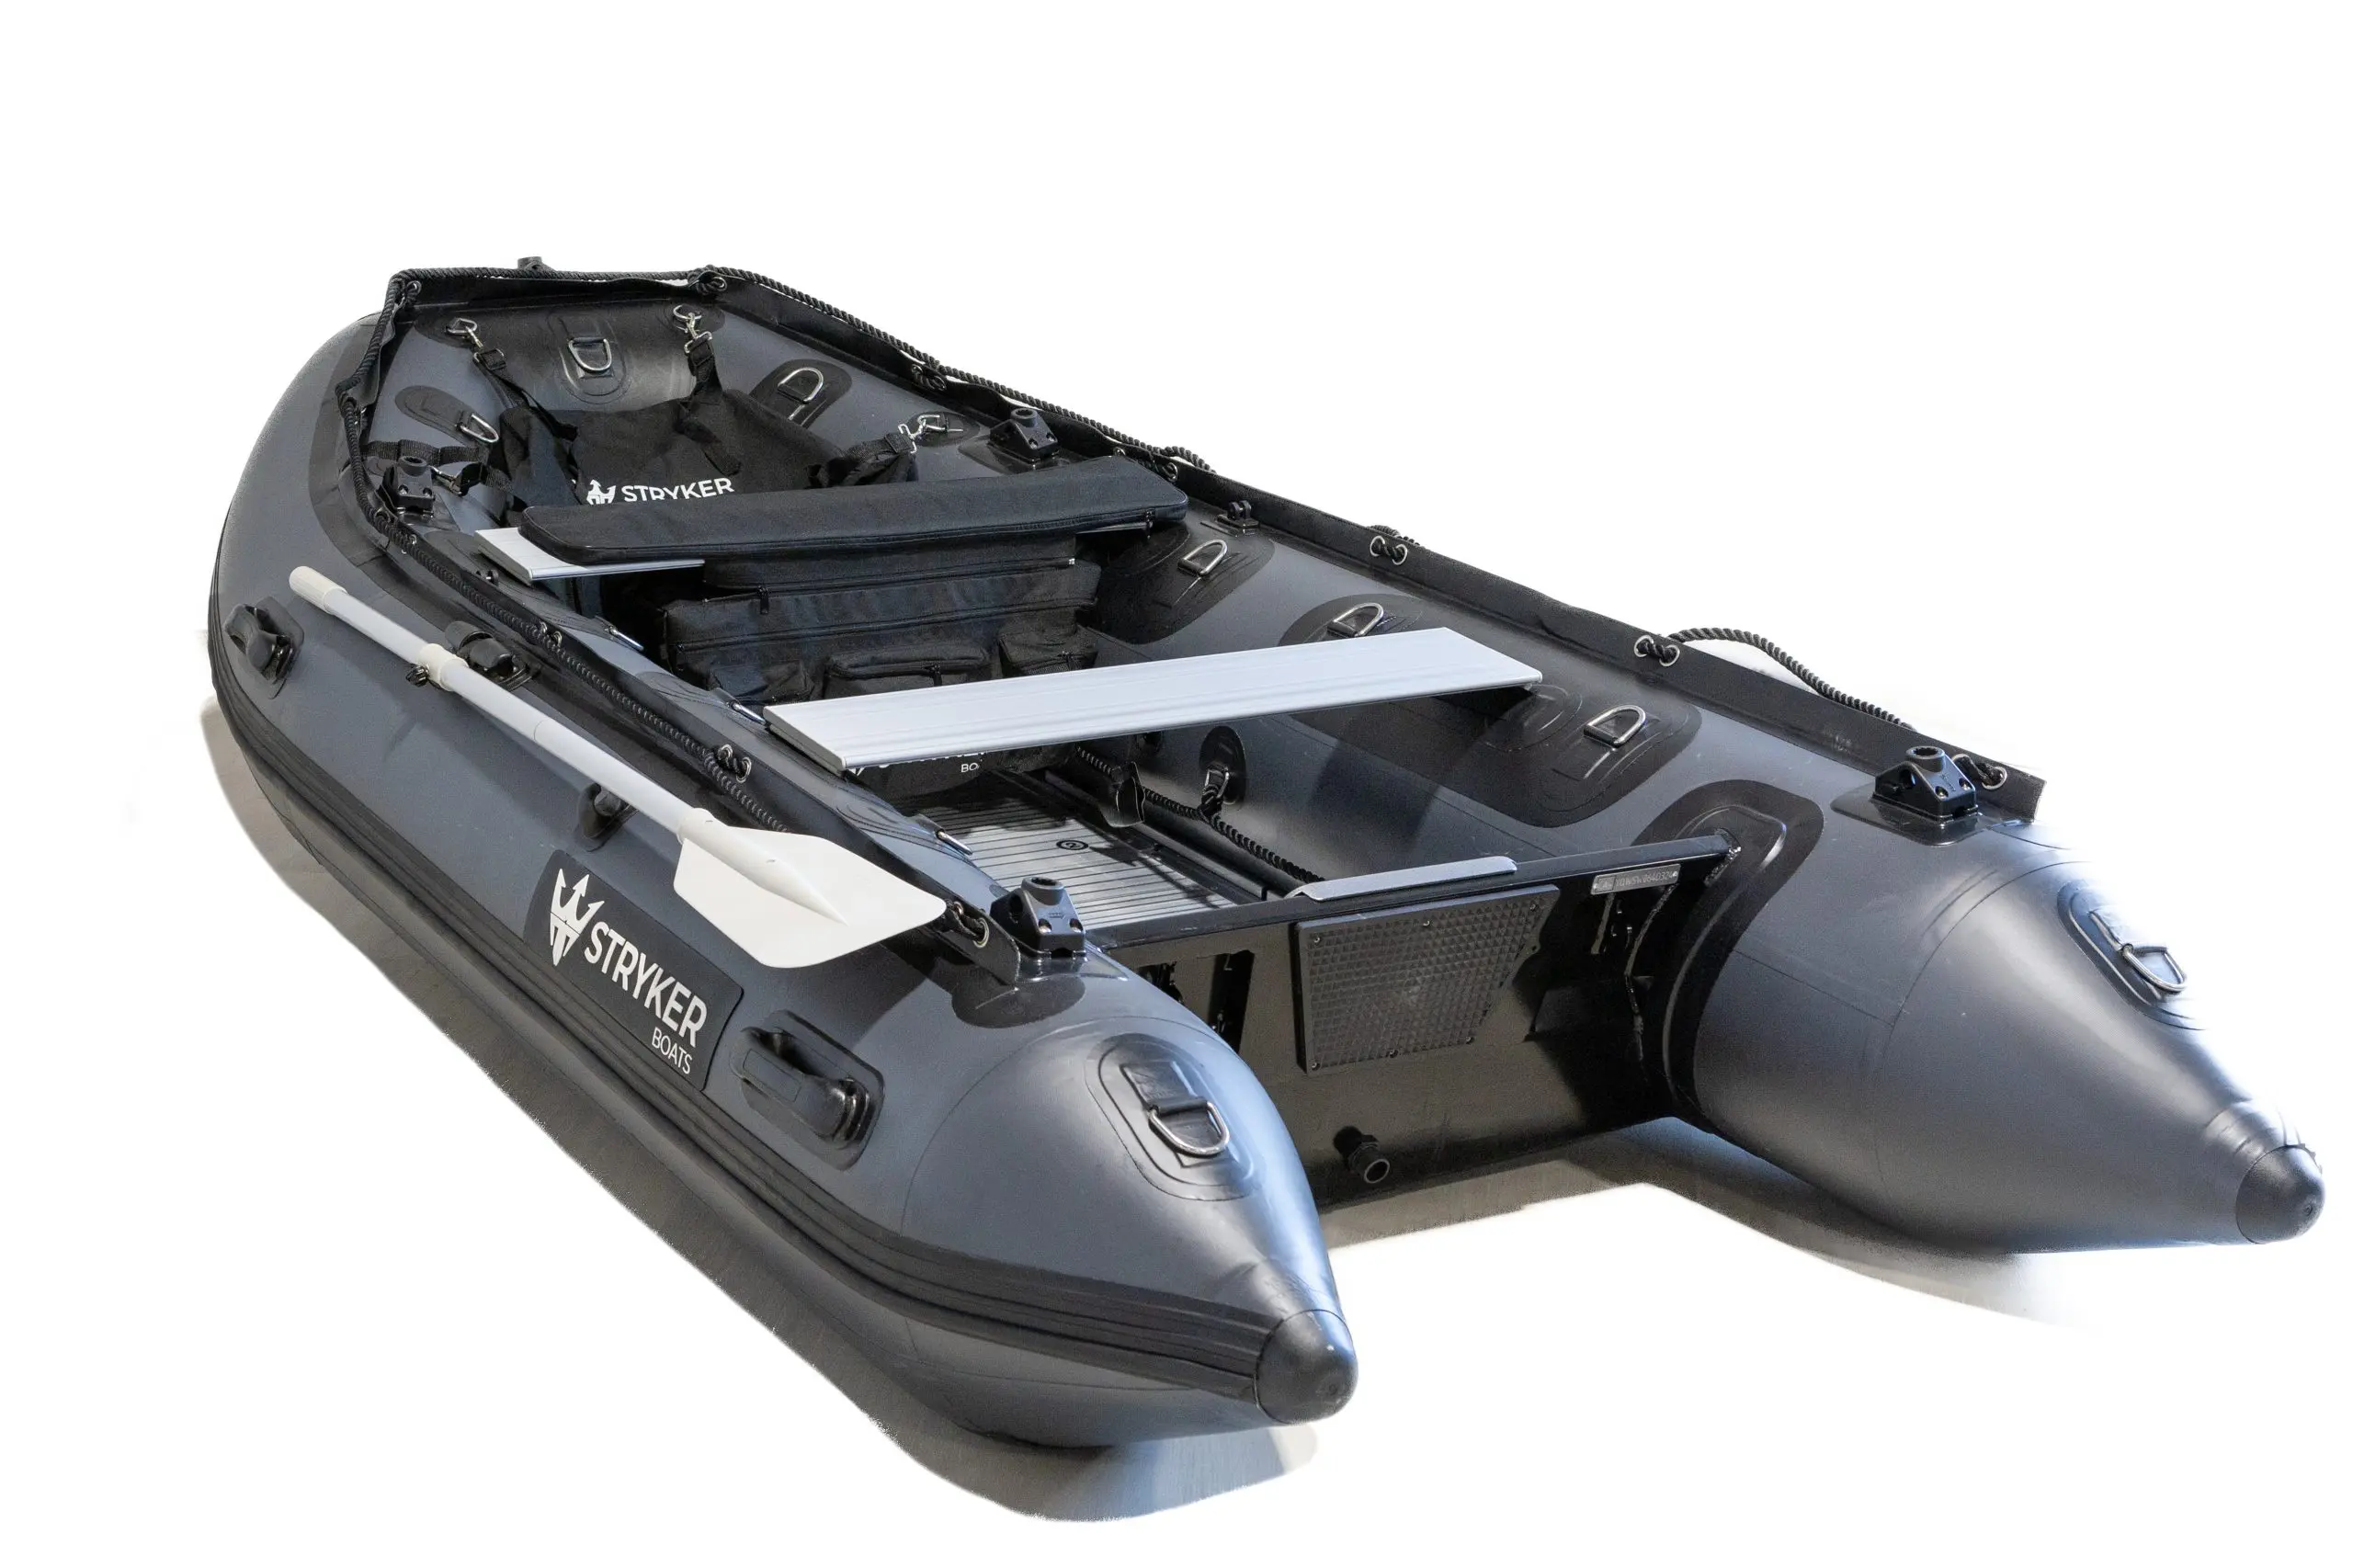 Stryker LX 320 (10' 5”) Inflatable Boat